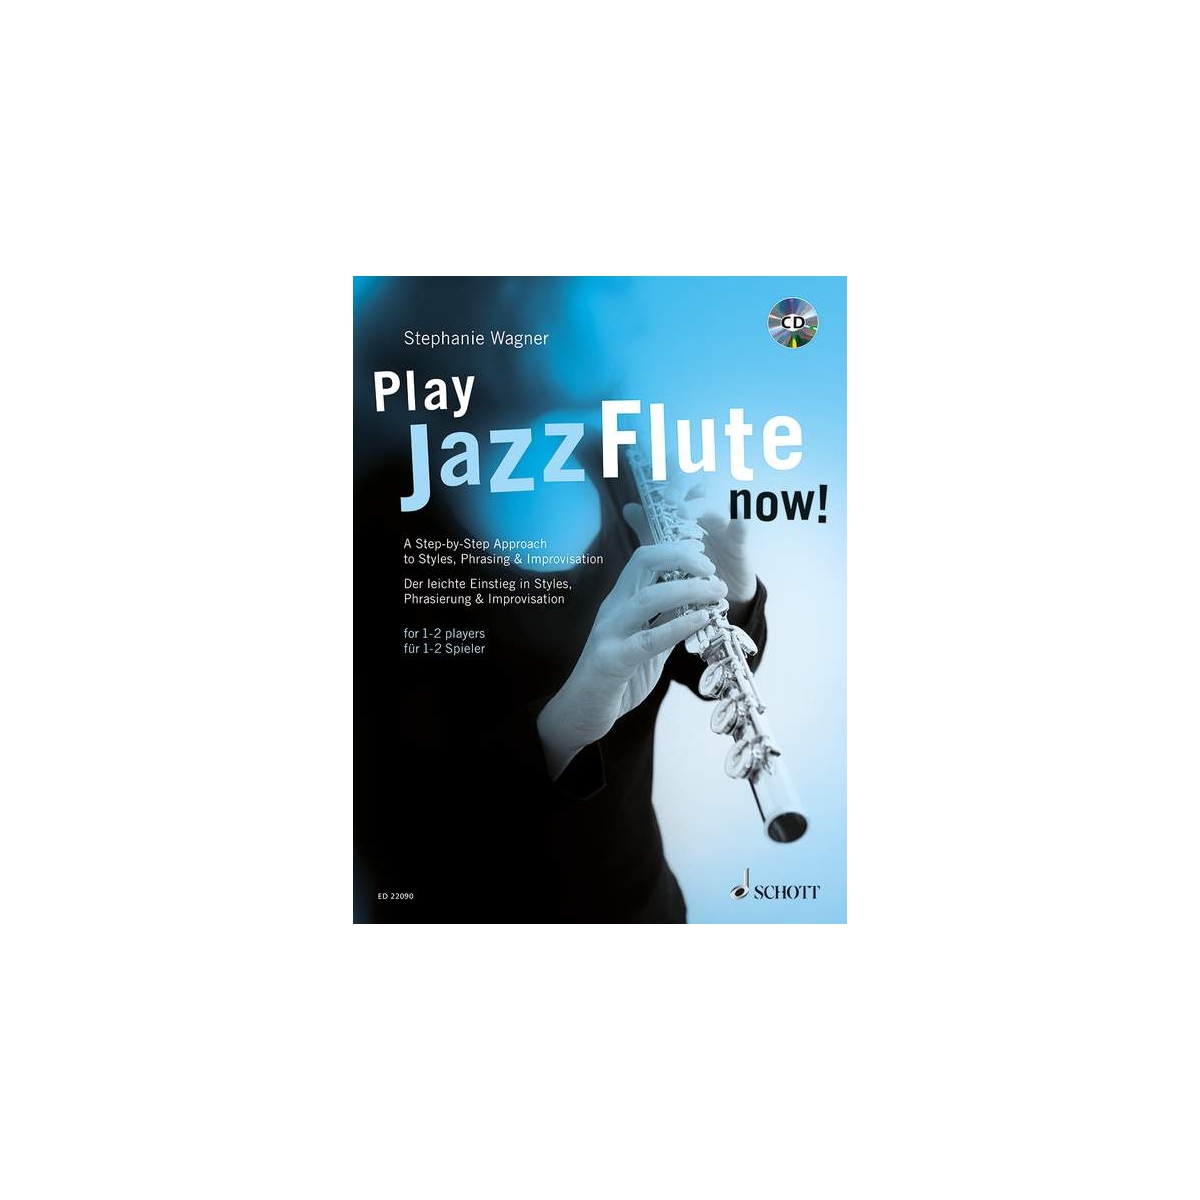 Play Jazz Flute - now!